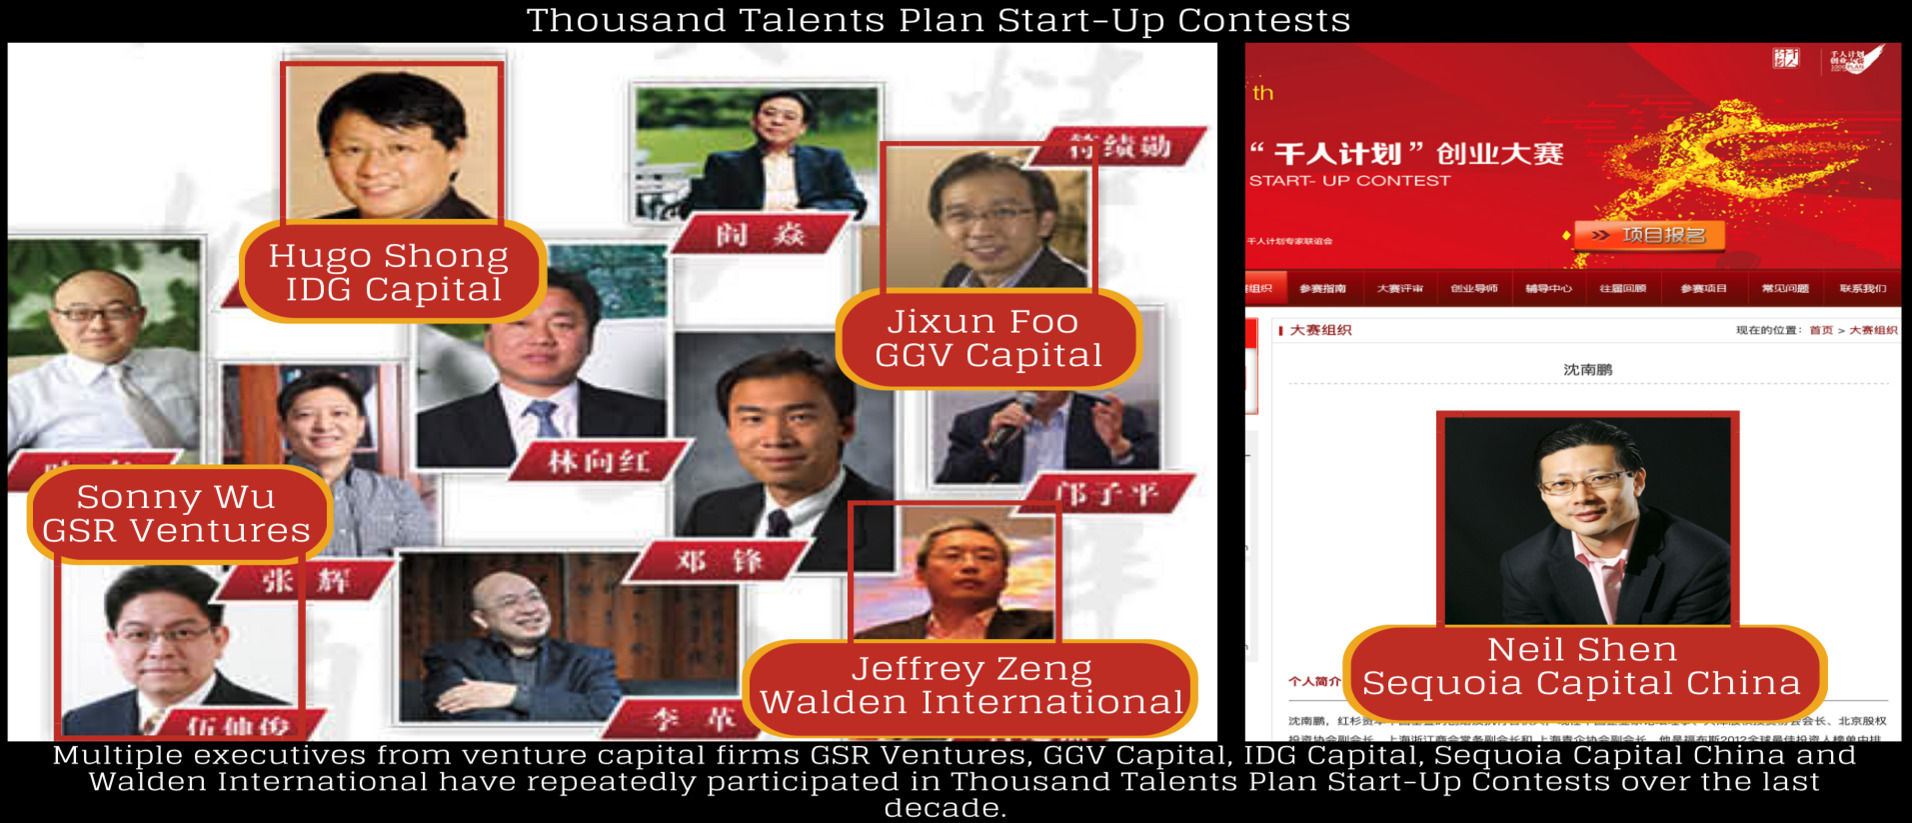 [Image created by the DCNF with pics from the Thousand Talents Plan website]